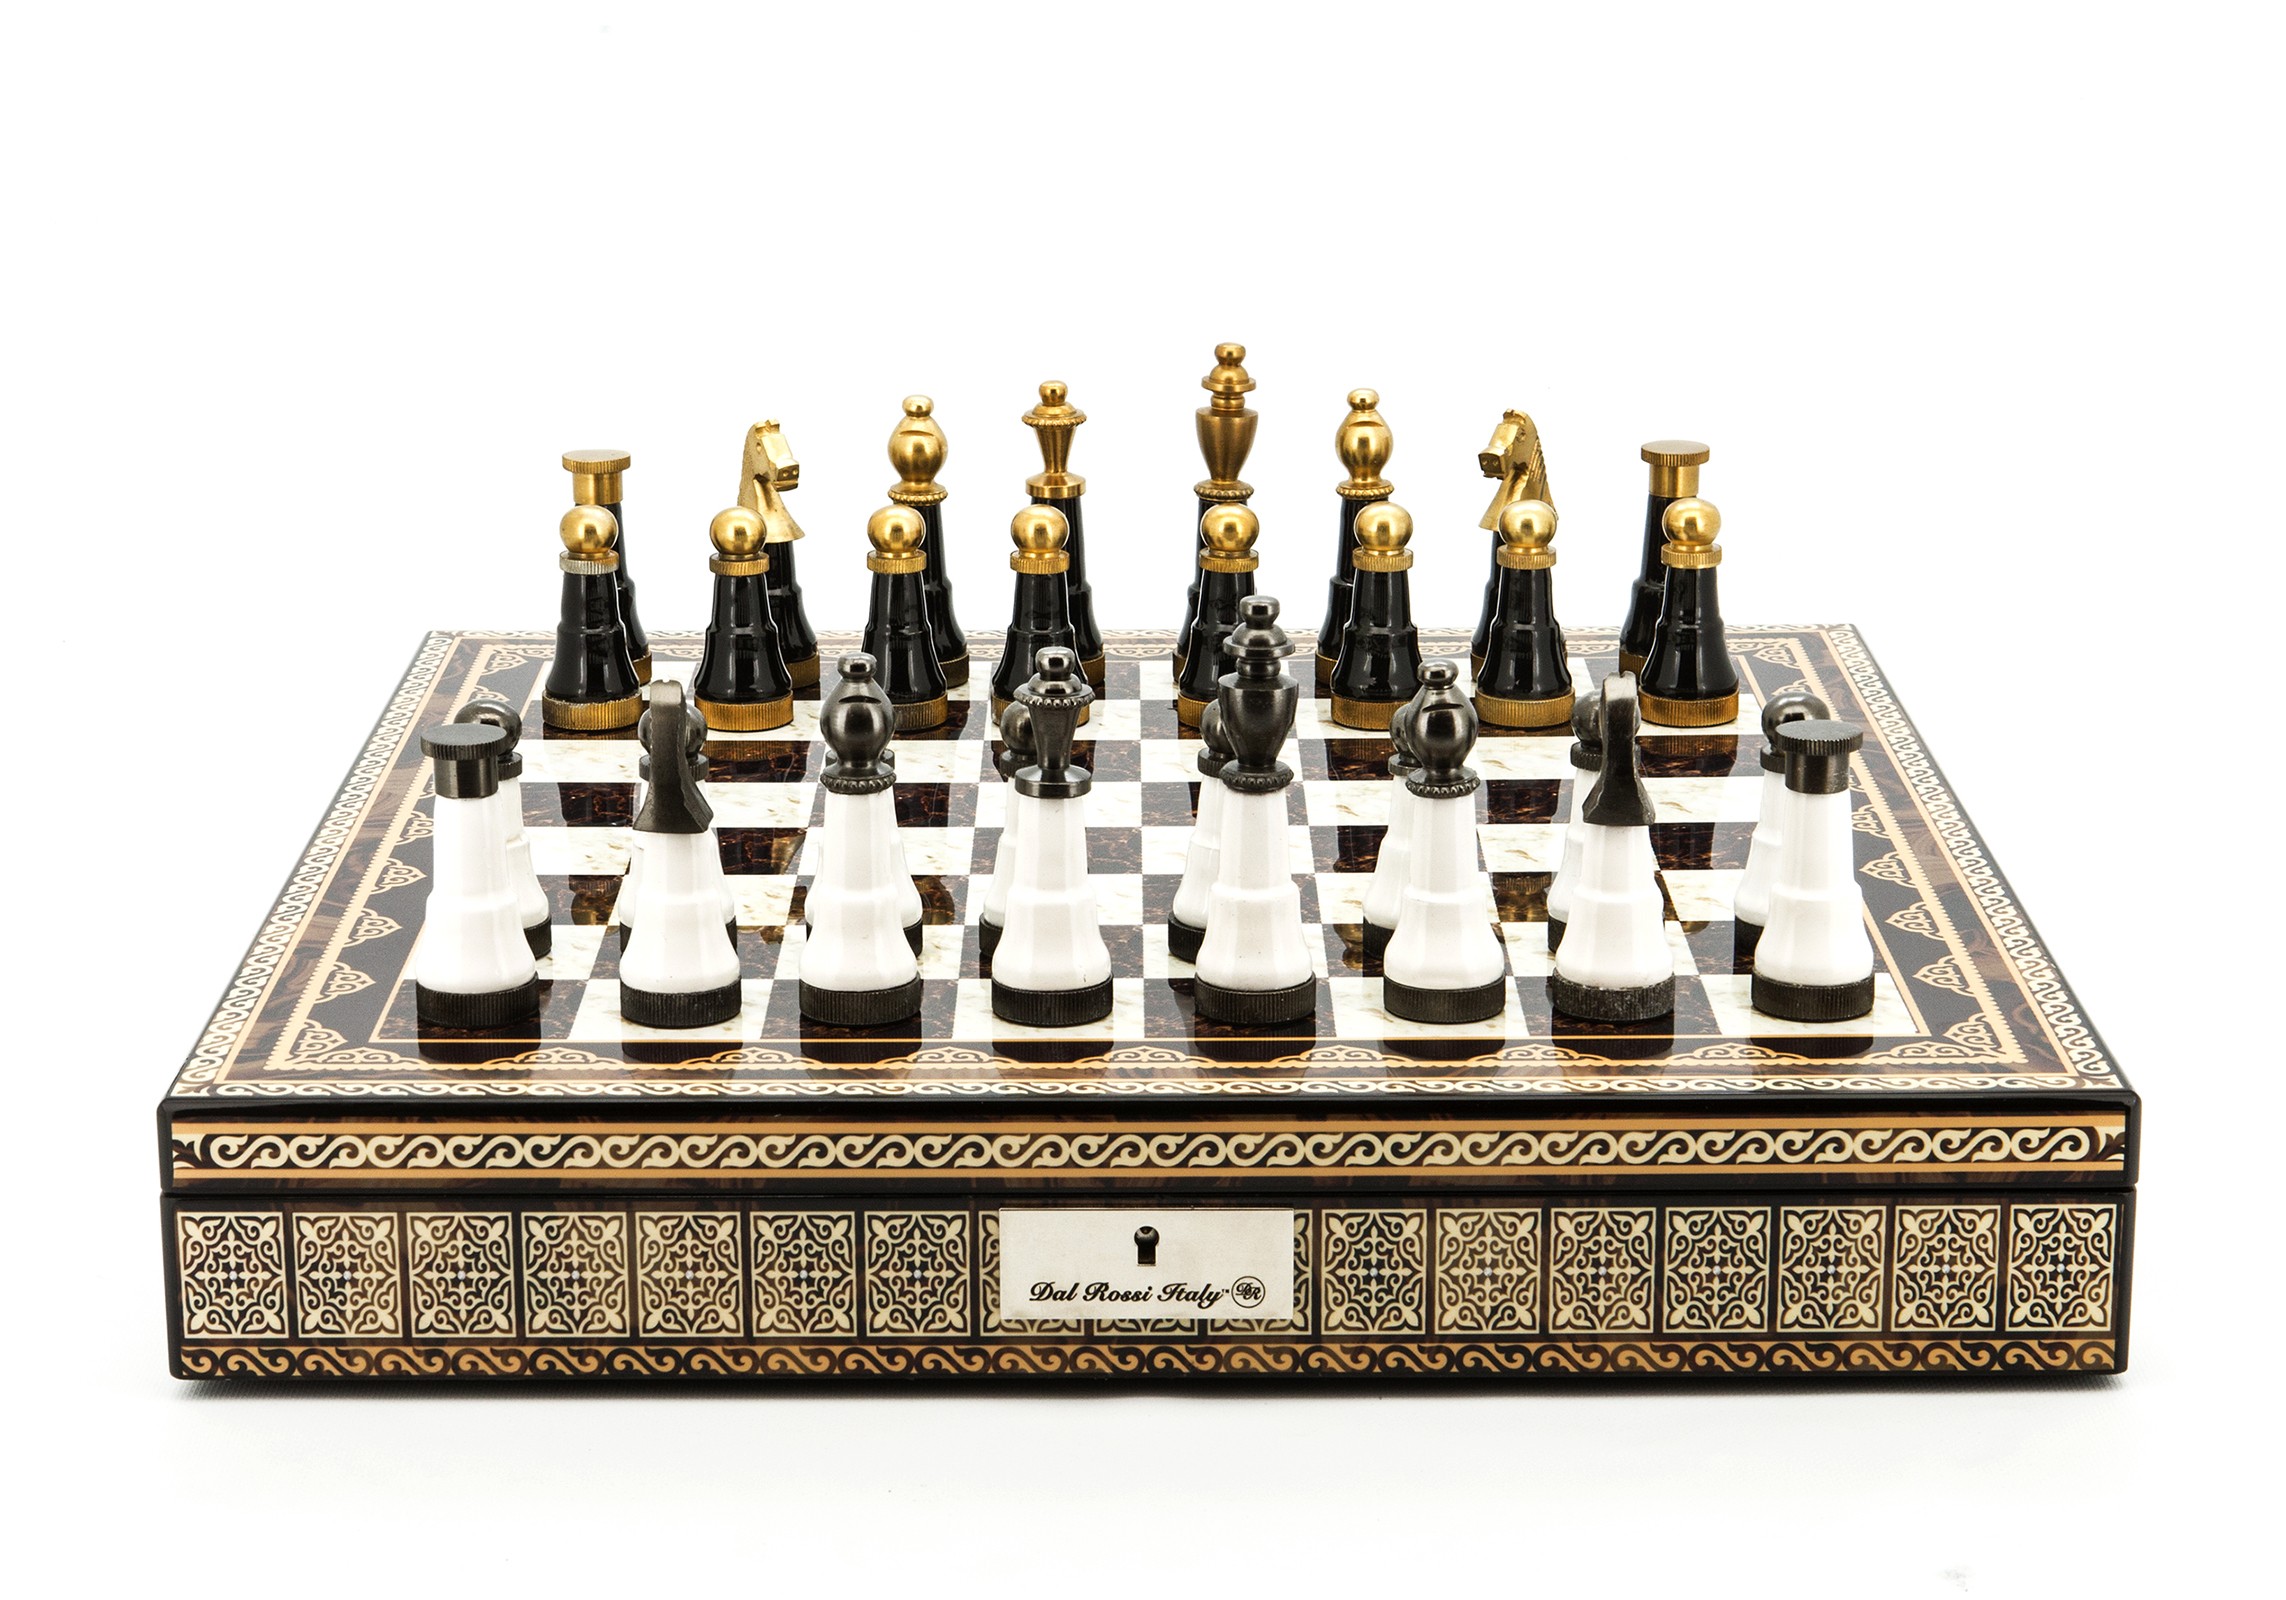 Dal Rossi Italy Chess Set Mosaic Shinny Finish 20″ With Compartments, With Black and White with Gold and Gun Metal Tops and Bottoms Chessmen 110mm